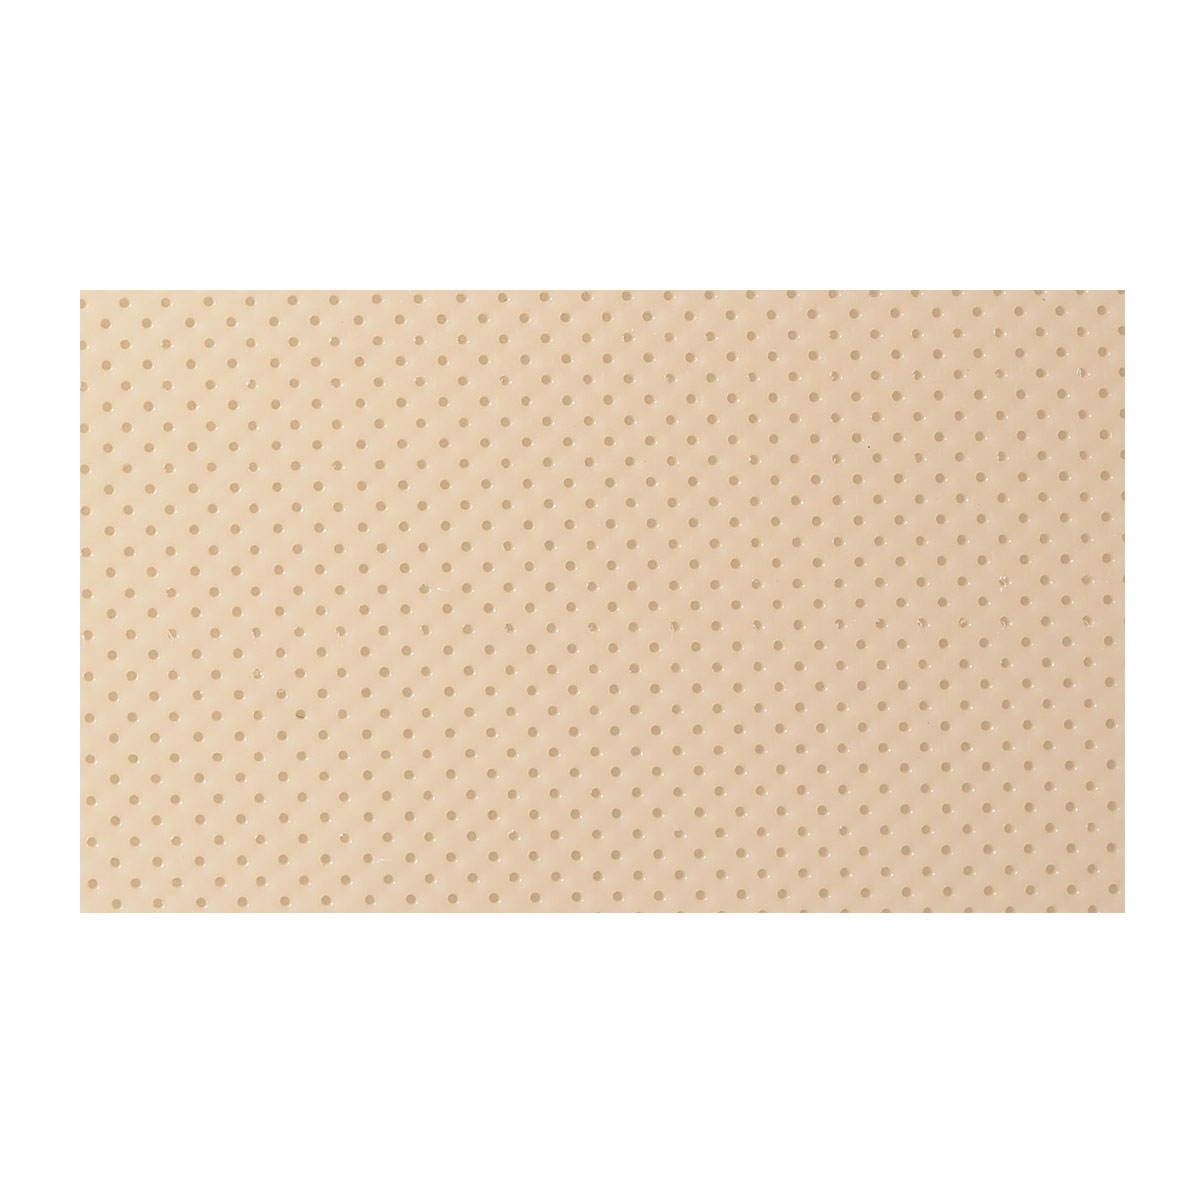 Picture of Orfit 24-5621-1 18 x 24 x 0.06 in. Classic Soft 13 Percent Micro Perforated Splinting Material